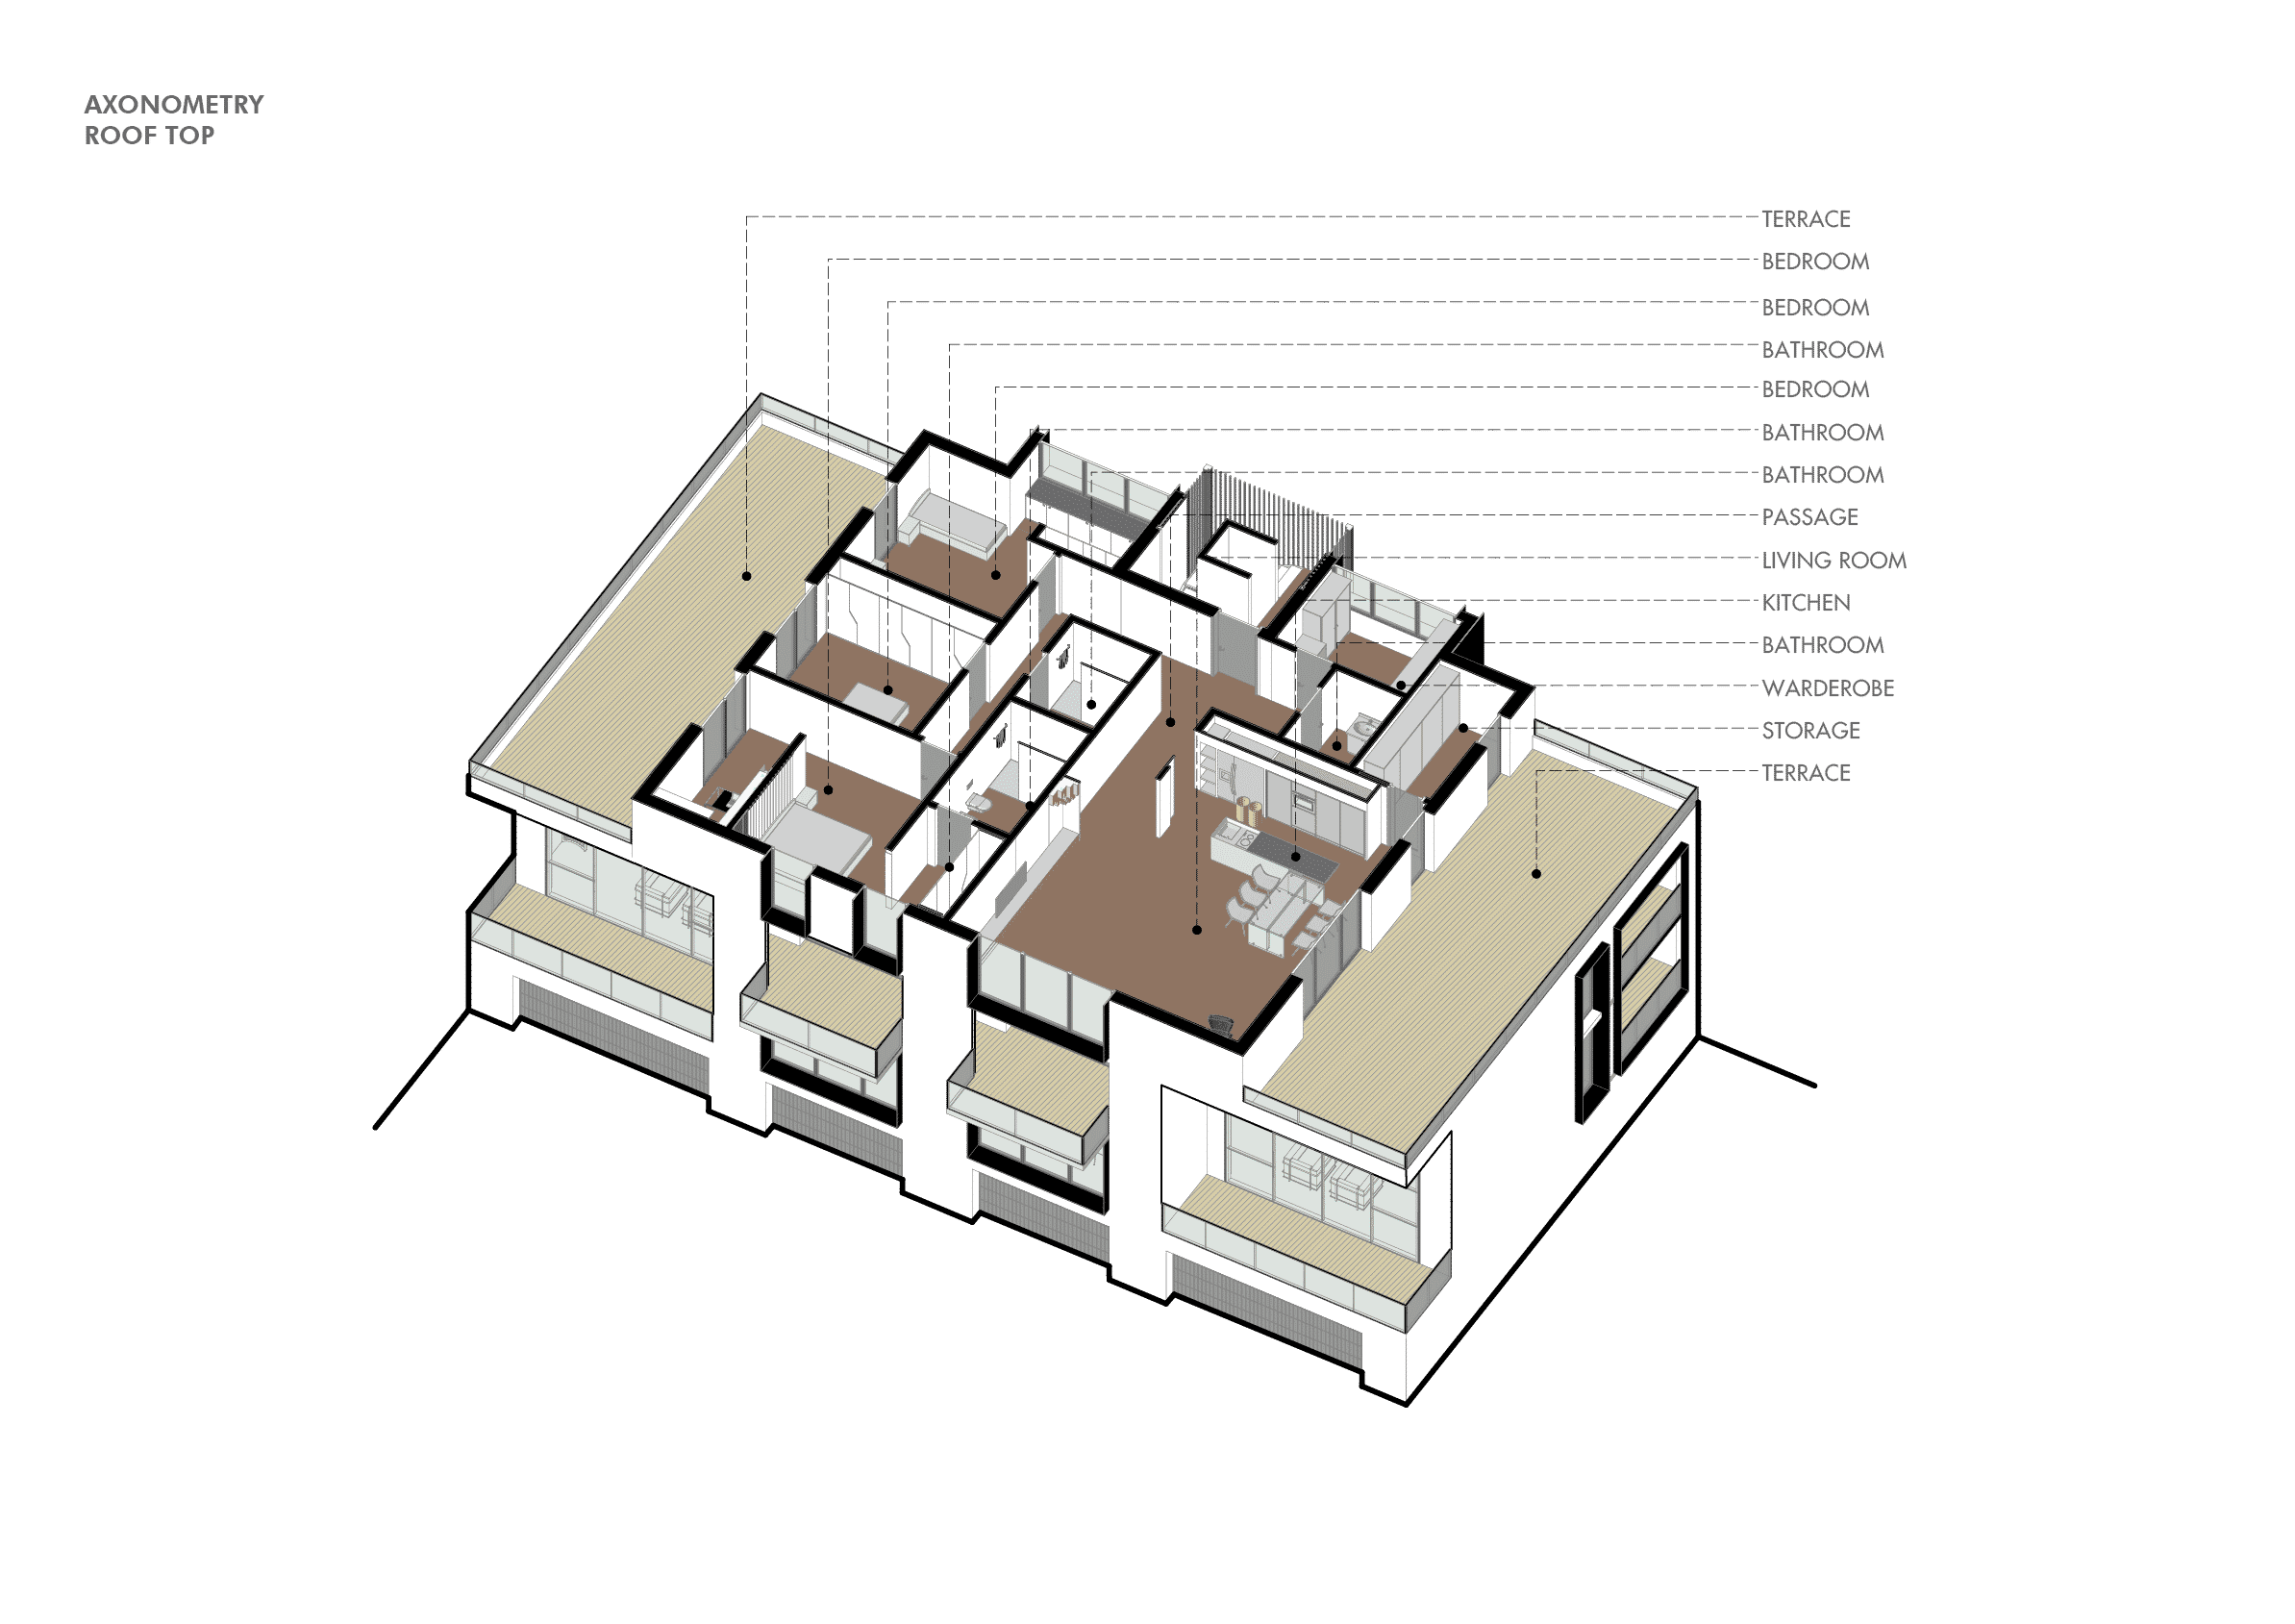 016-swiss-project-axonometry-roof-top2x